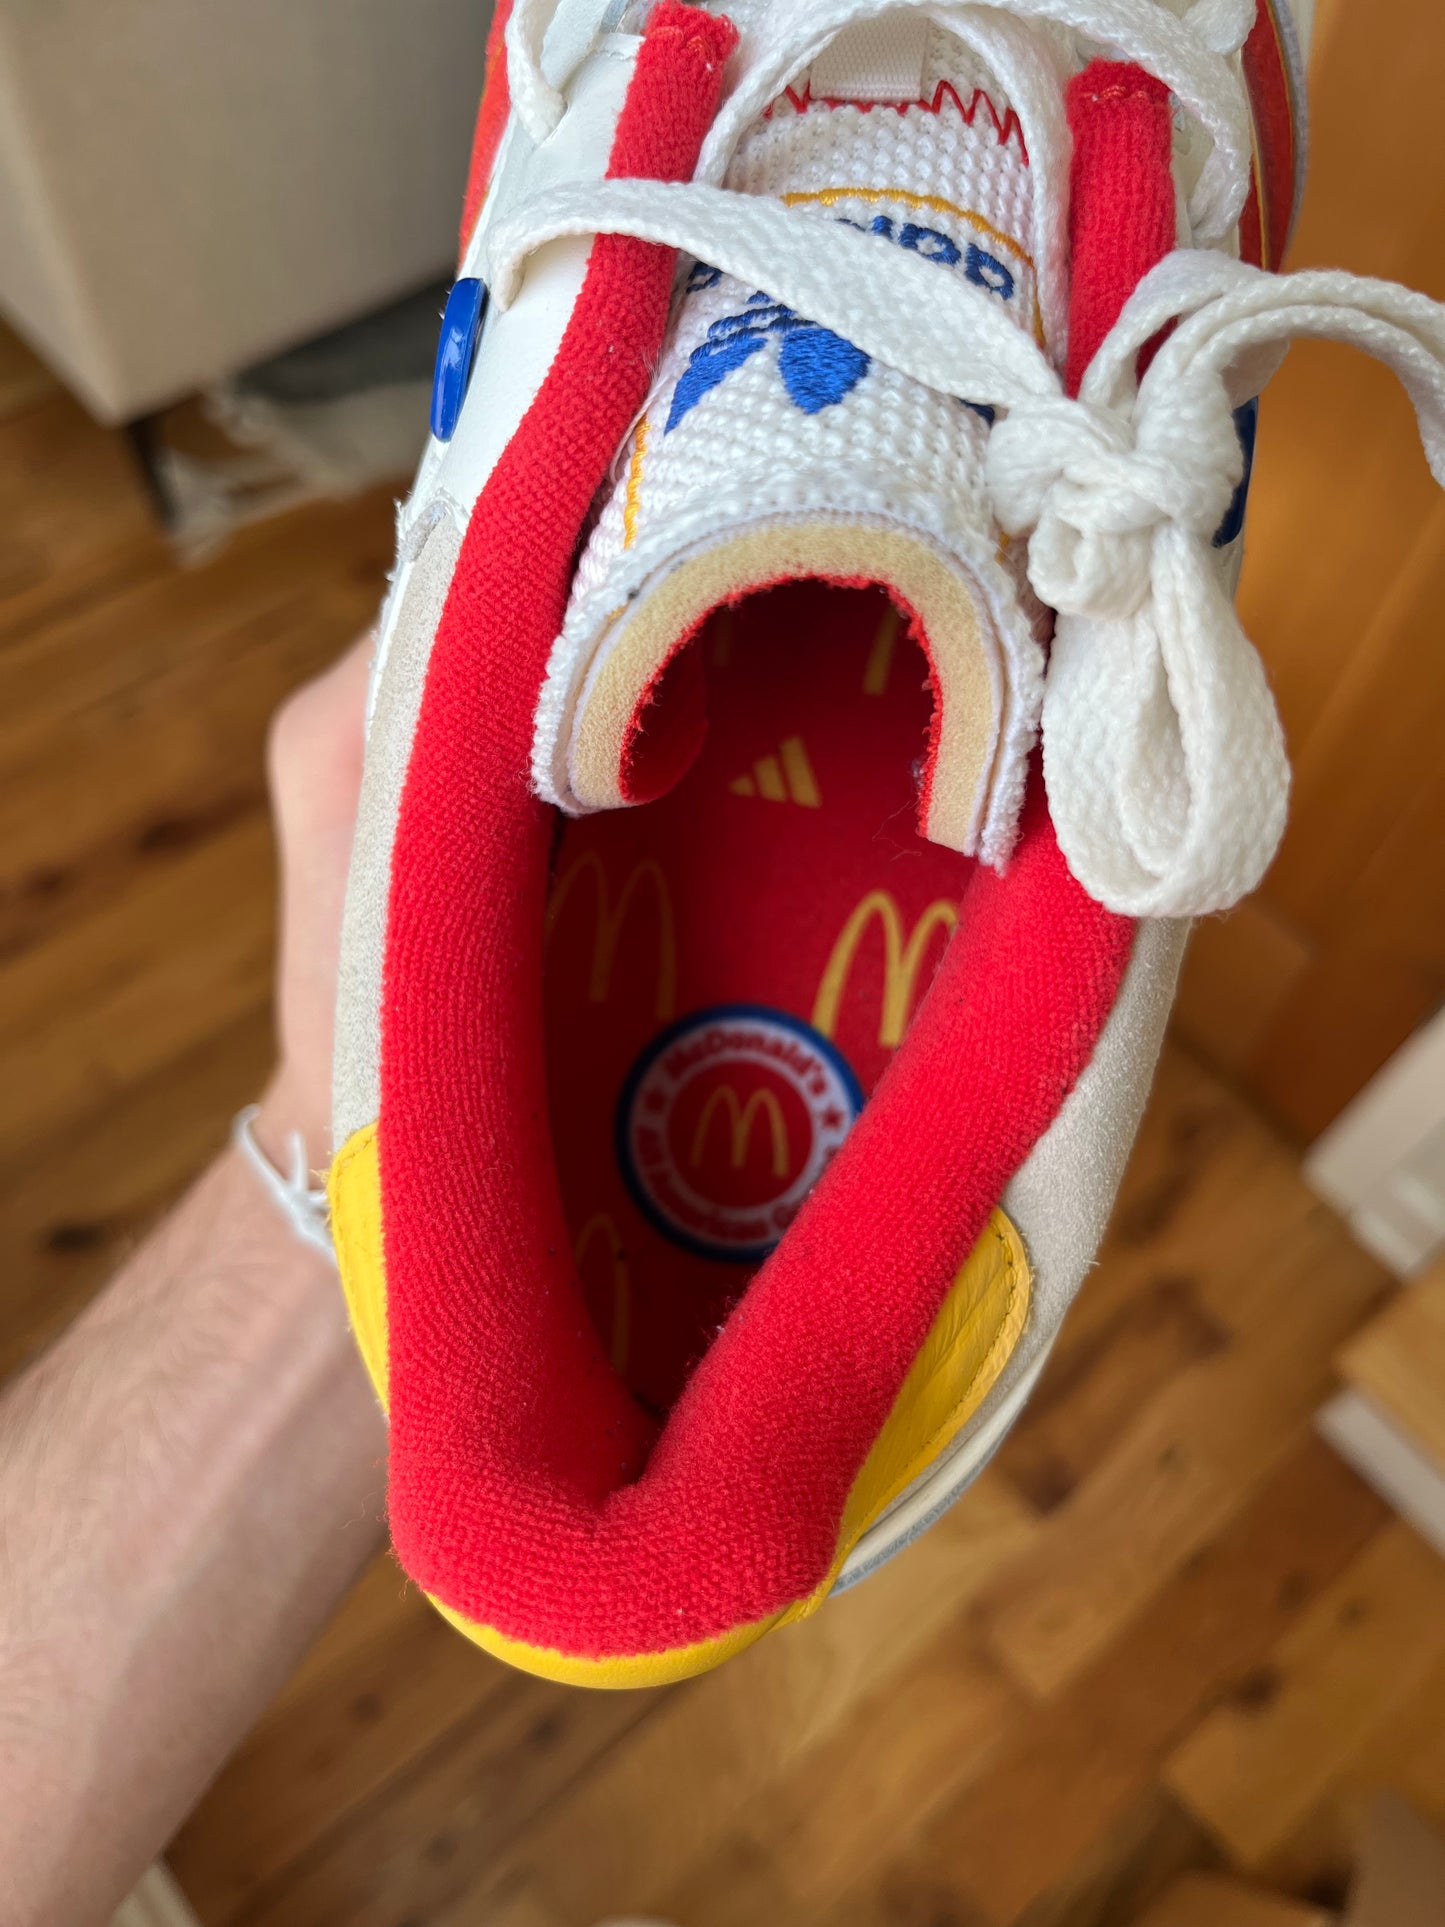 McDonald’s All American’s (size 12.5)